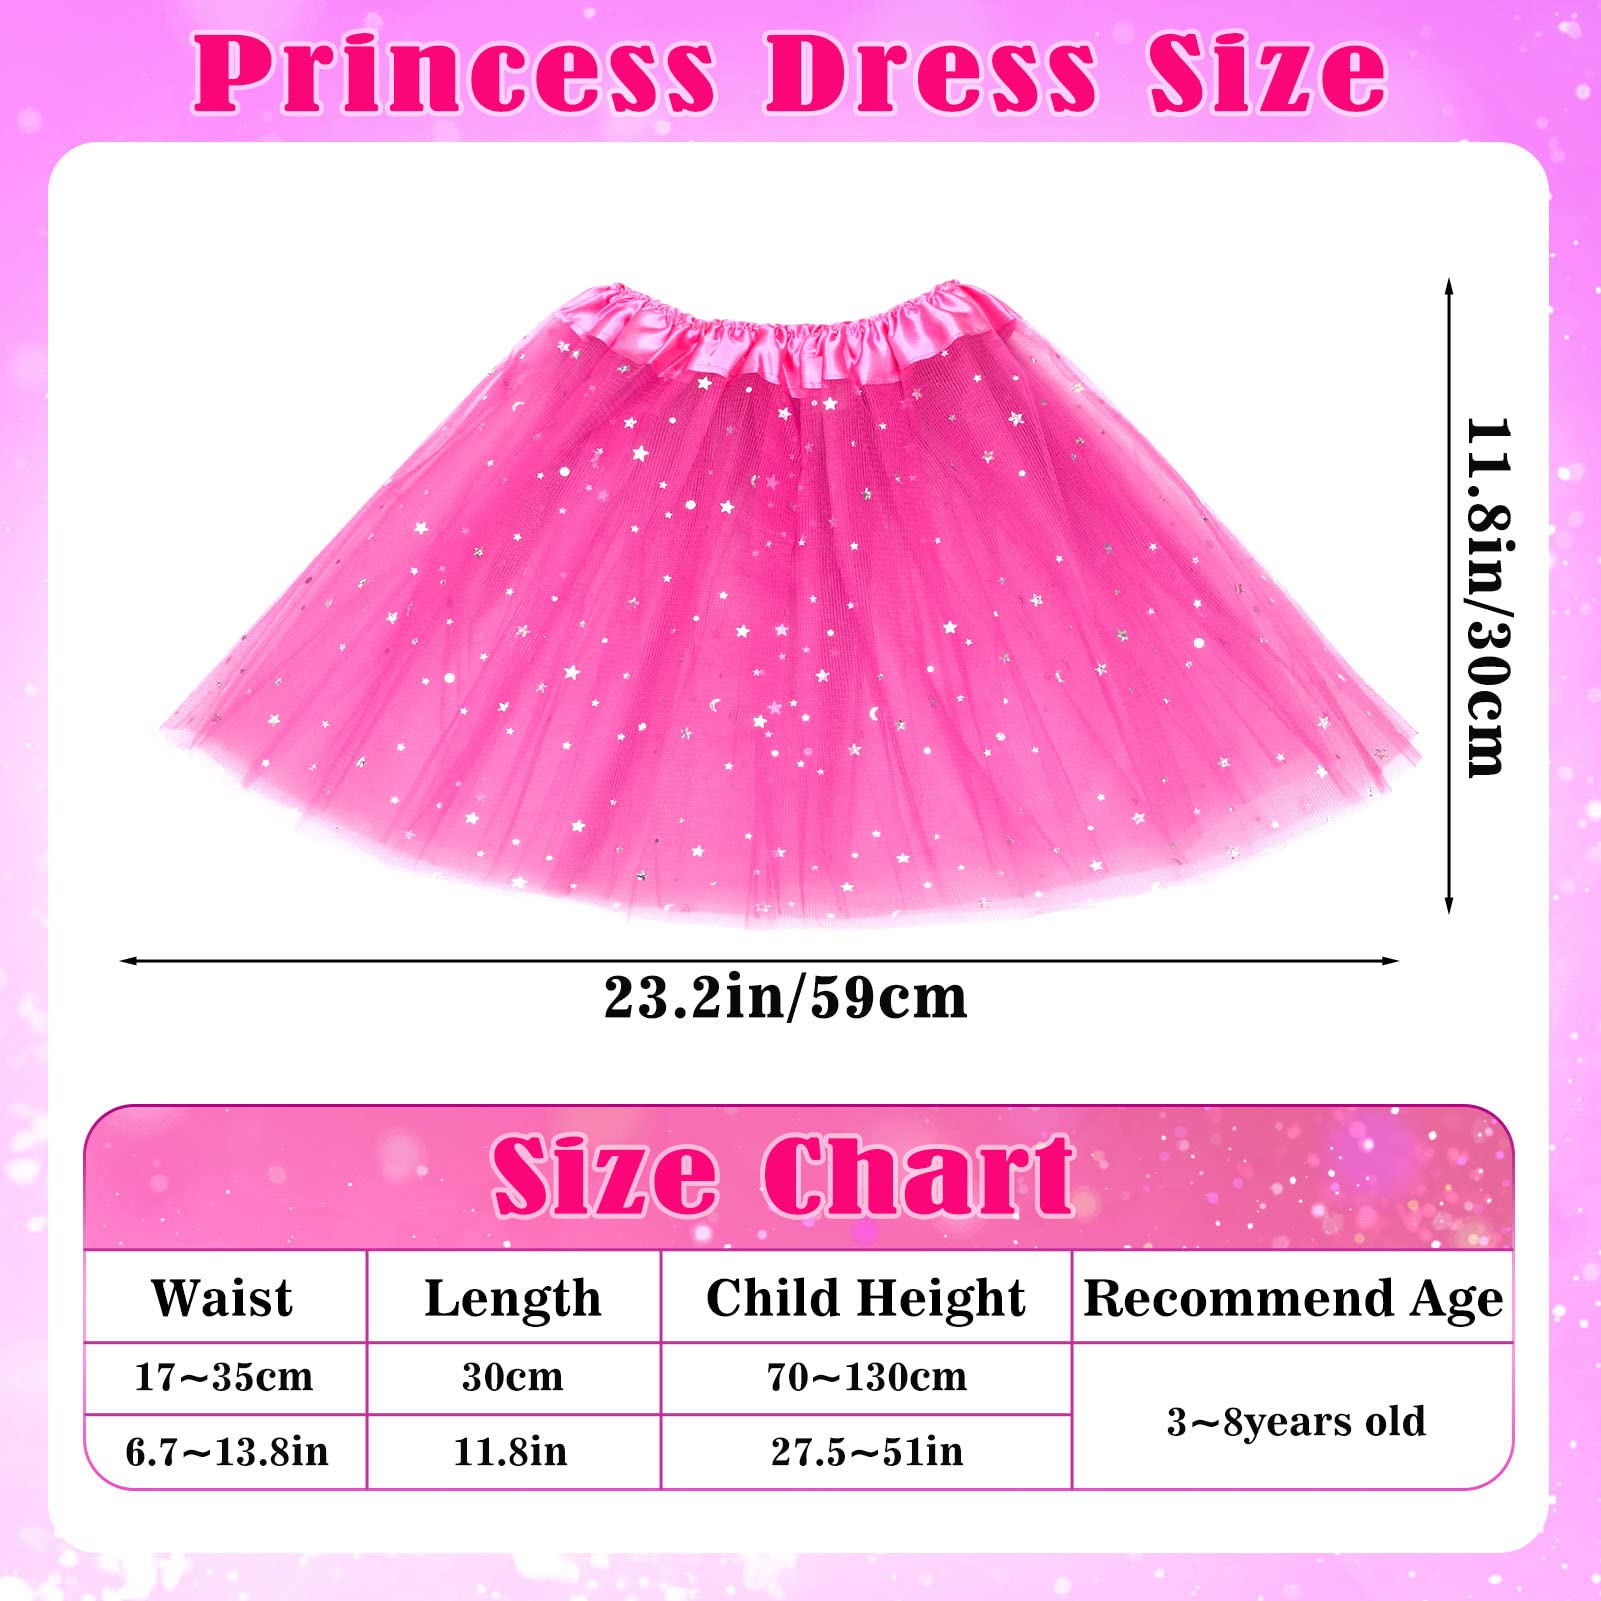 G.C Girls Princess Dress up Clothes with Star Sequins and Princess Crown Tiara Set Ballet Birthday Party for 2-8 Year Old Girl Gifts Tutu Skirt as Party Favors